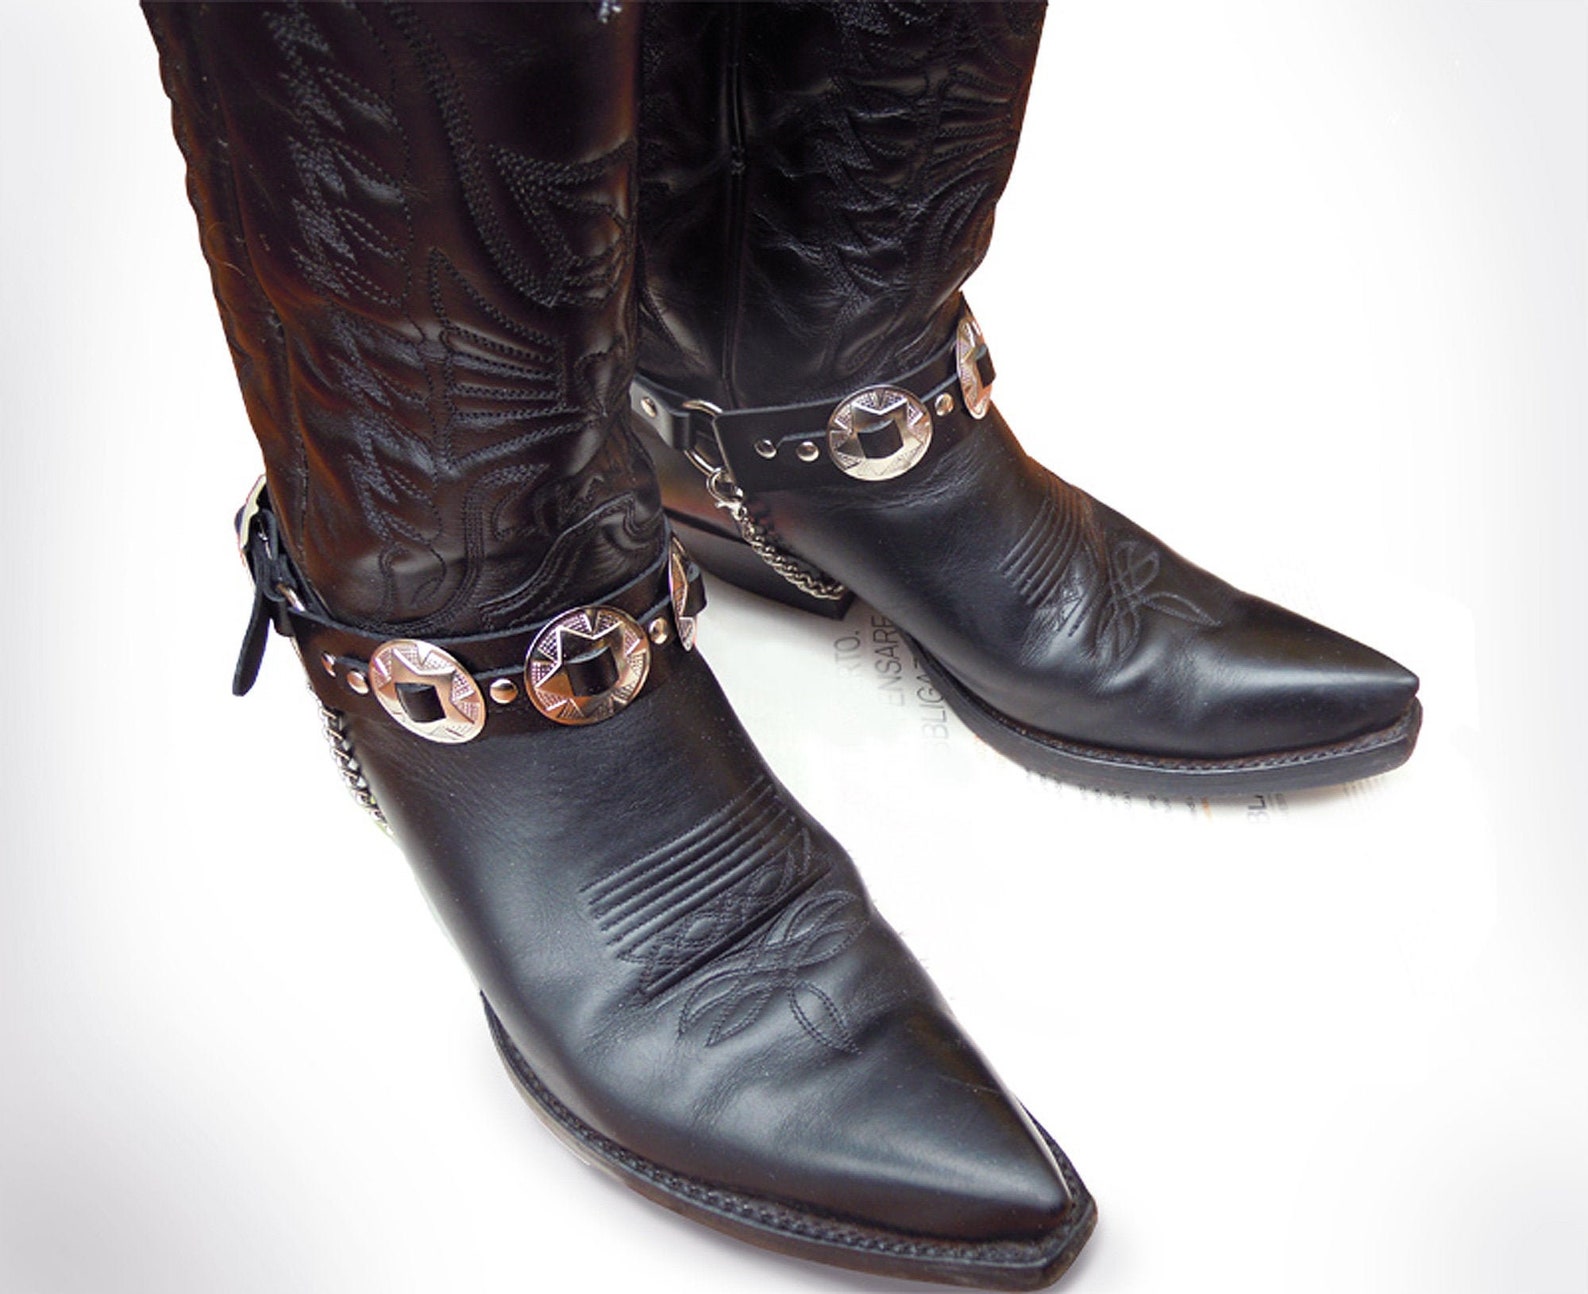 Concho Boot Straps Cowboy Boots Harness Leather Bootstraps - Etsy